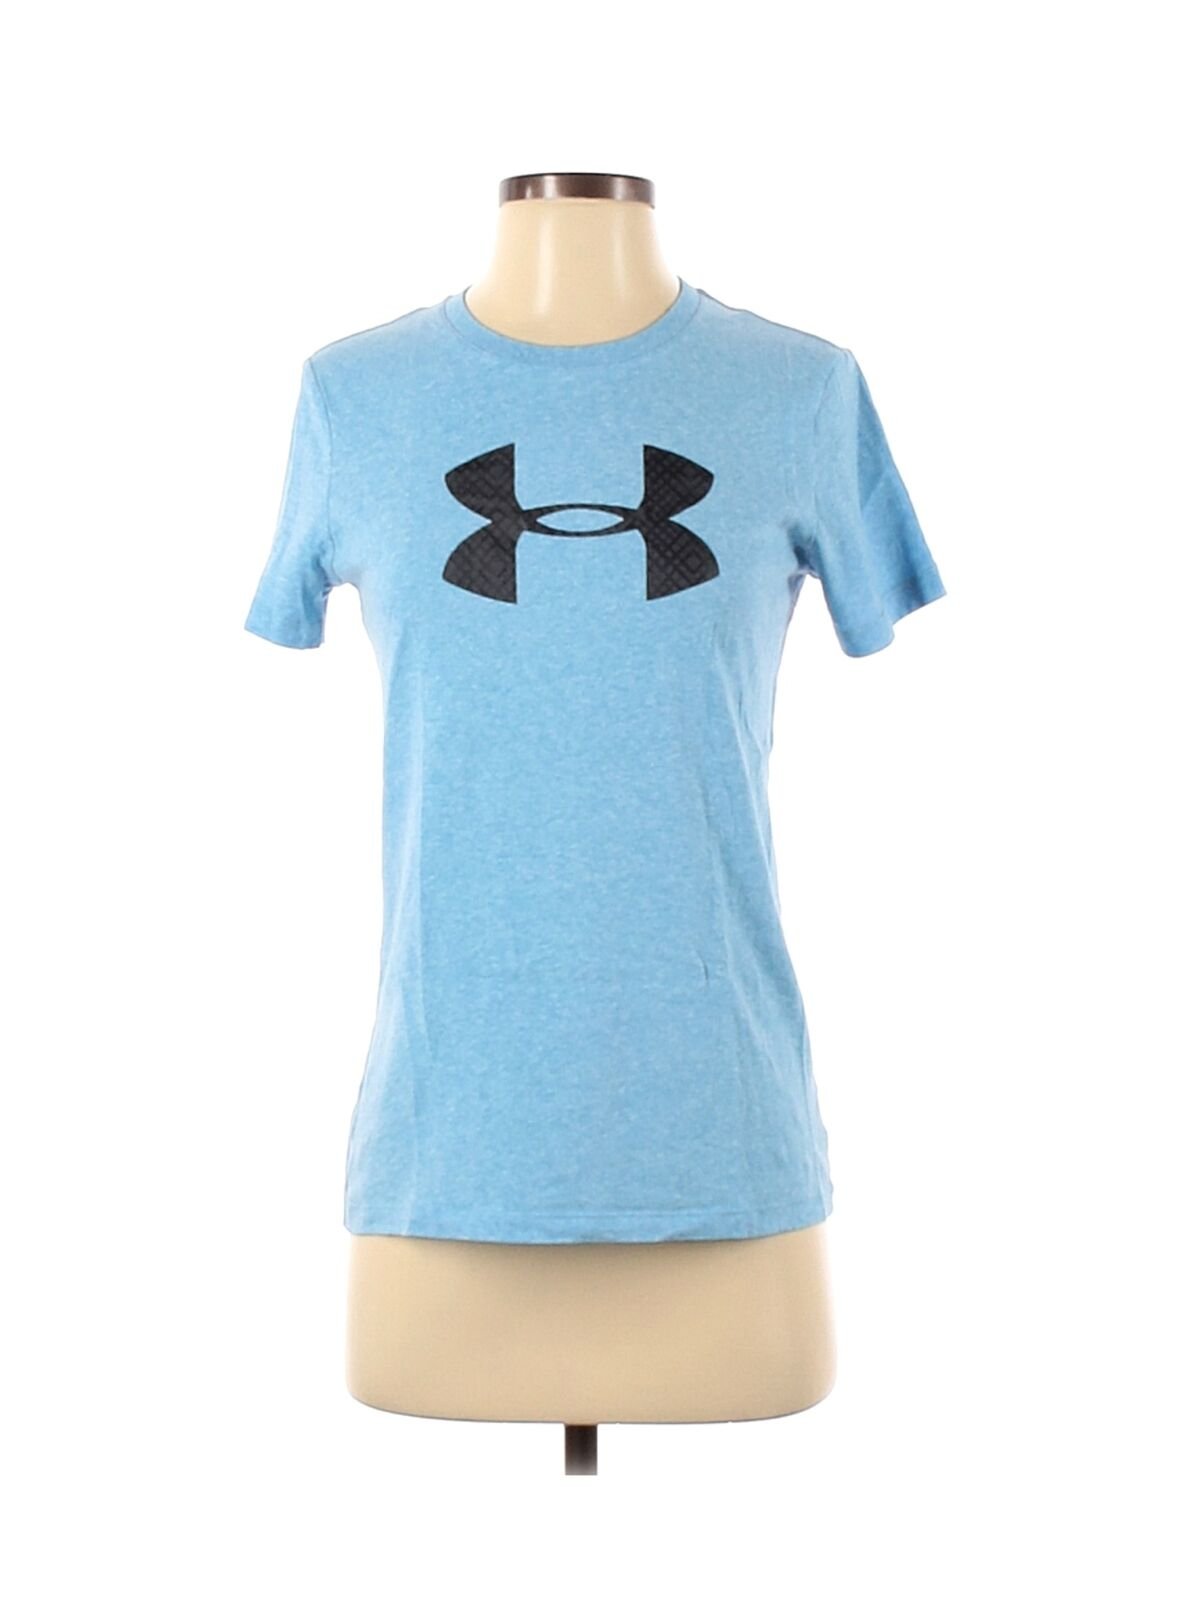 Under Armour Active T-Shirt in Blue.jpg